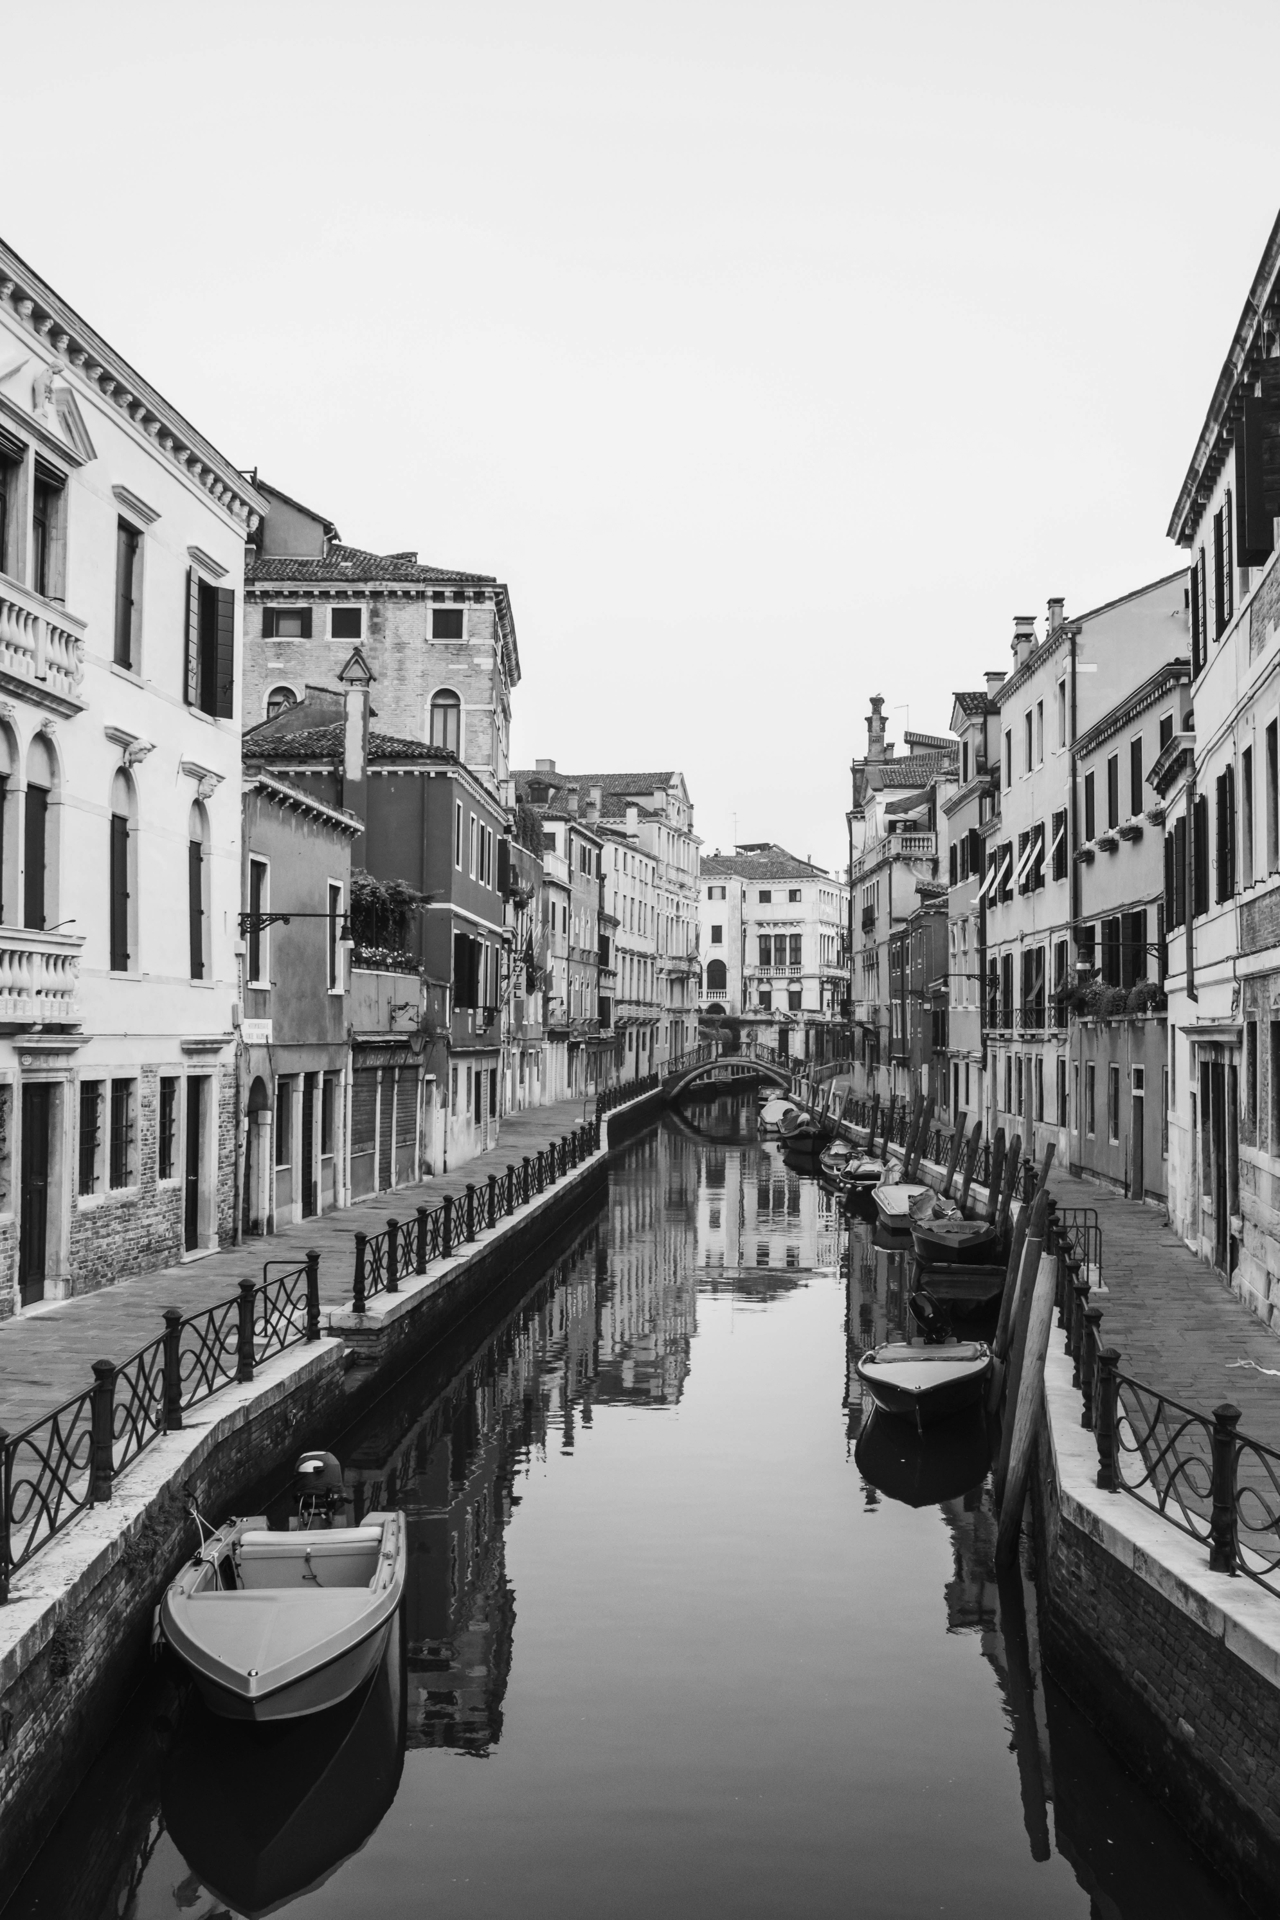 A canal in Venice, seen from a bridge